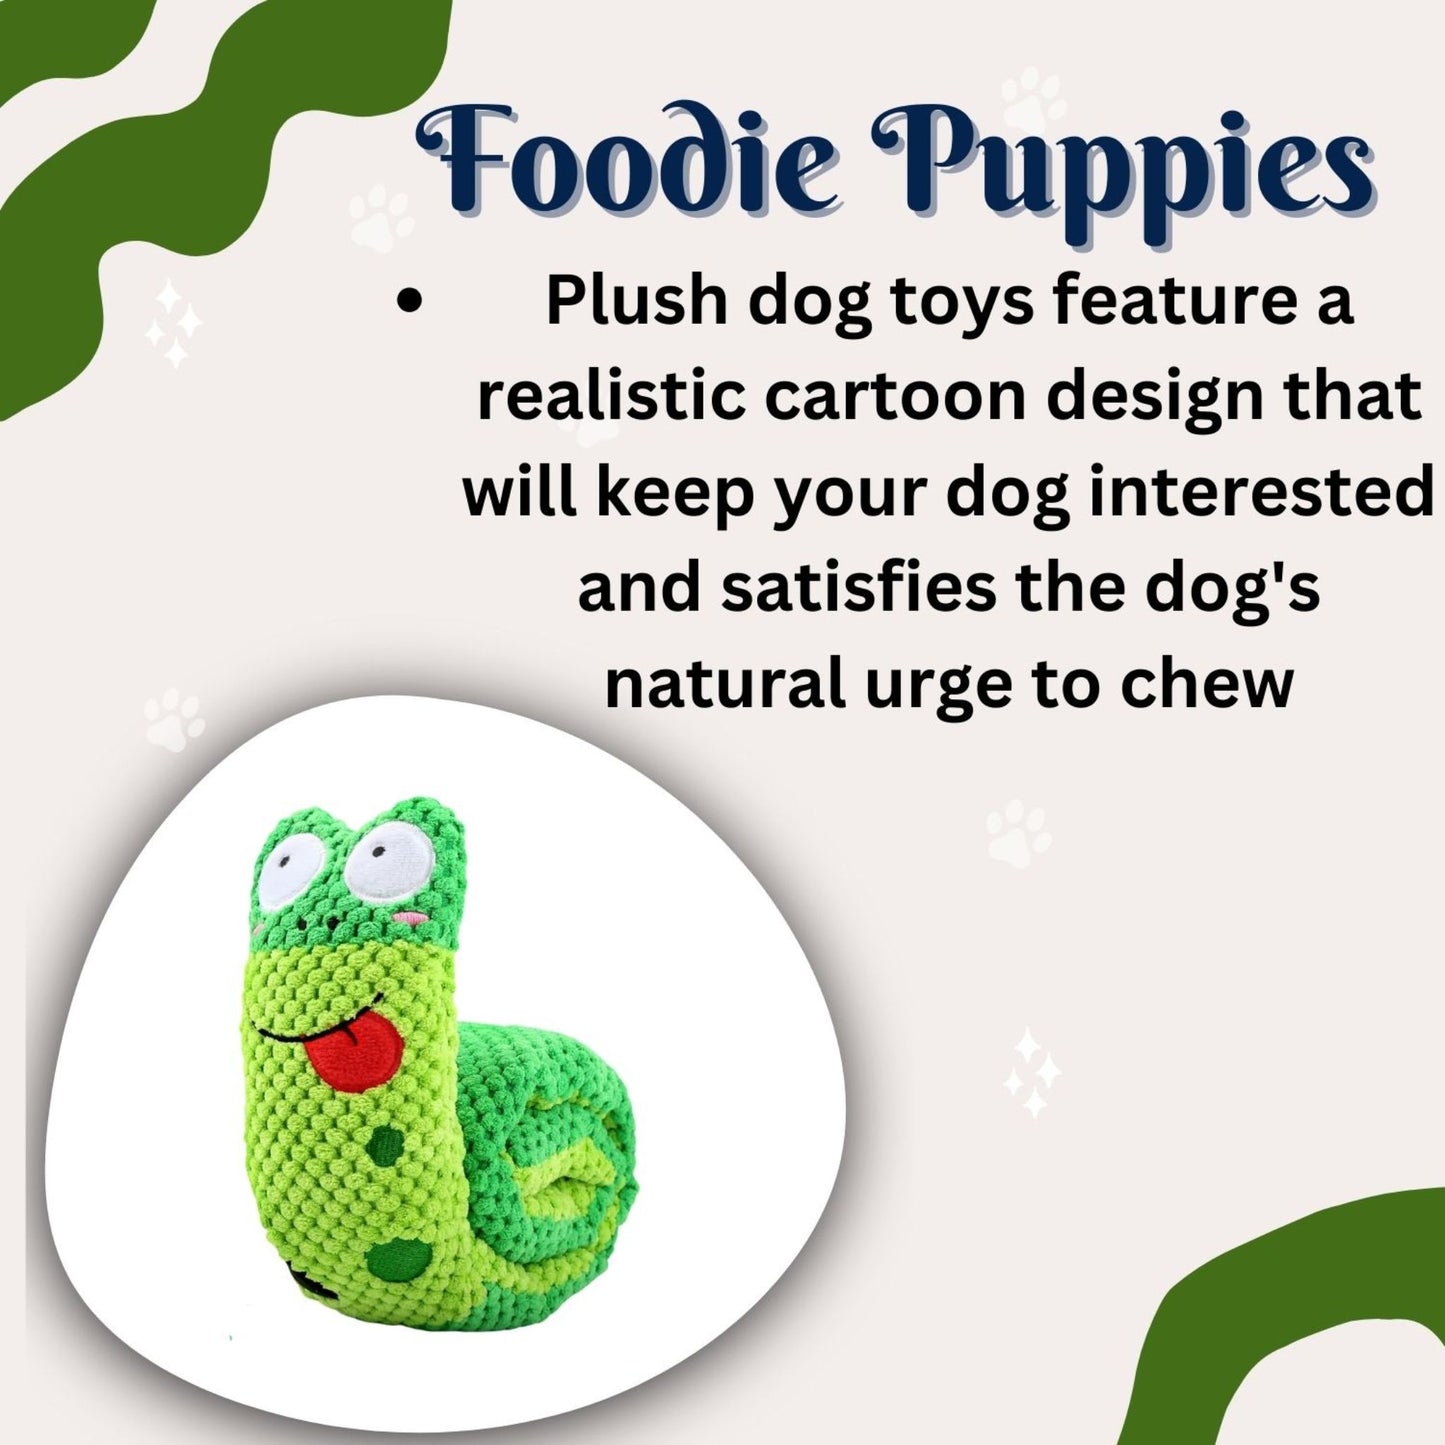 Foodie Puppies Snail Squeaky Plush Dog Toy for Small & Medium Dogs